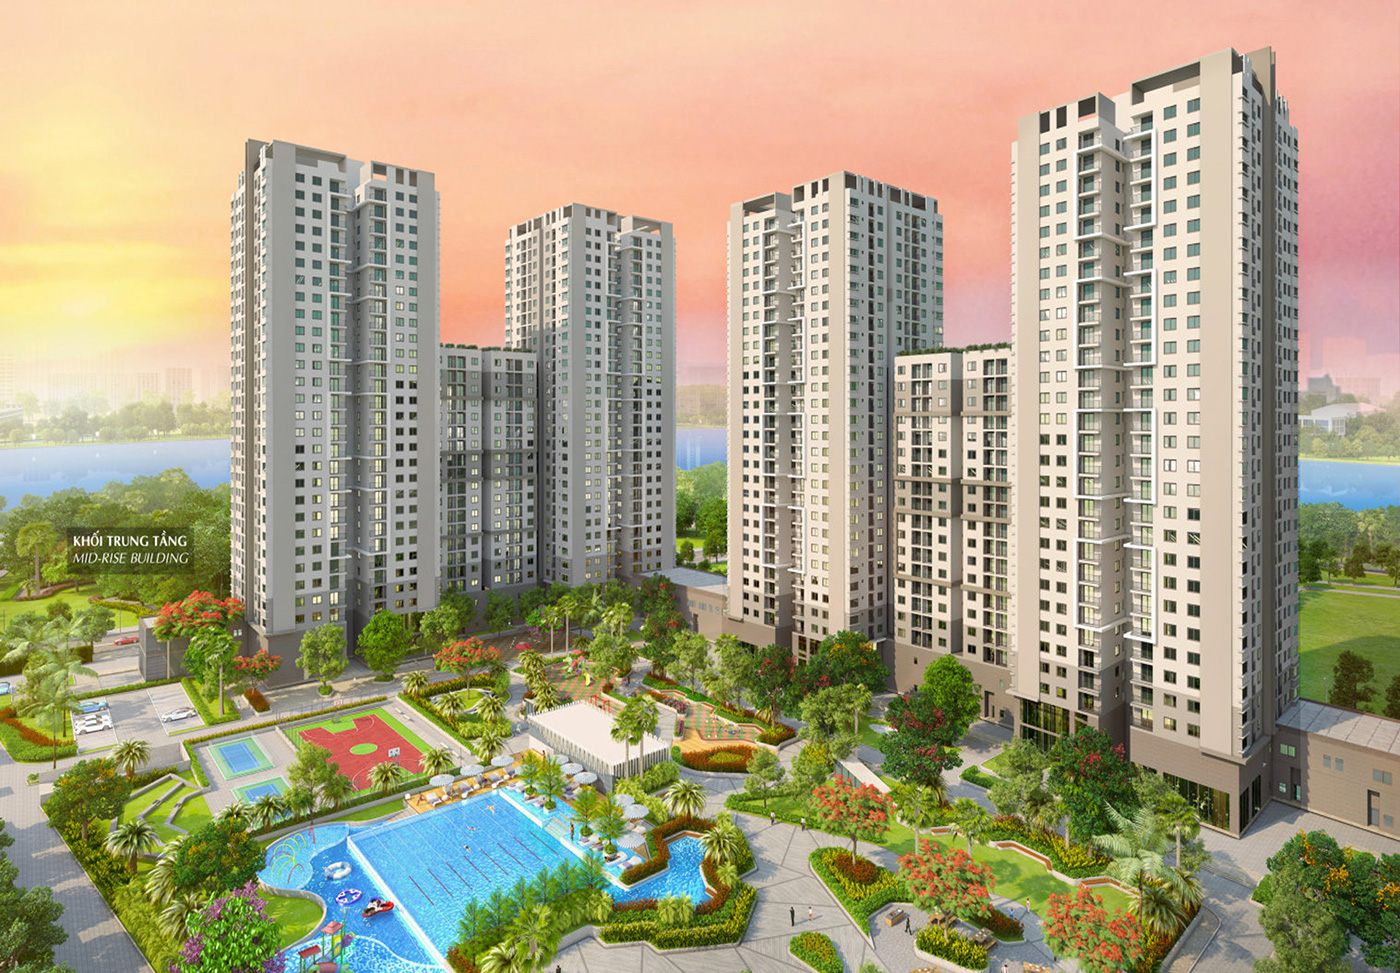 Why does saigon south residences become such a hot sale?